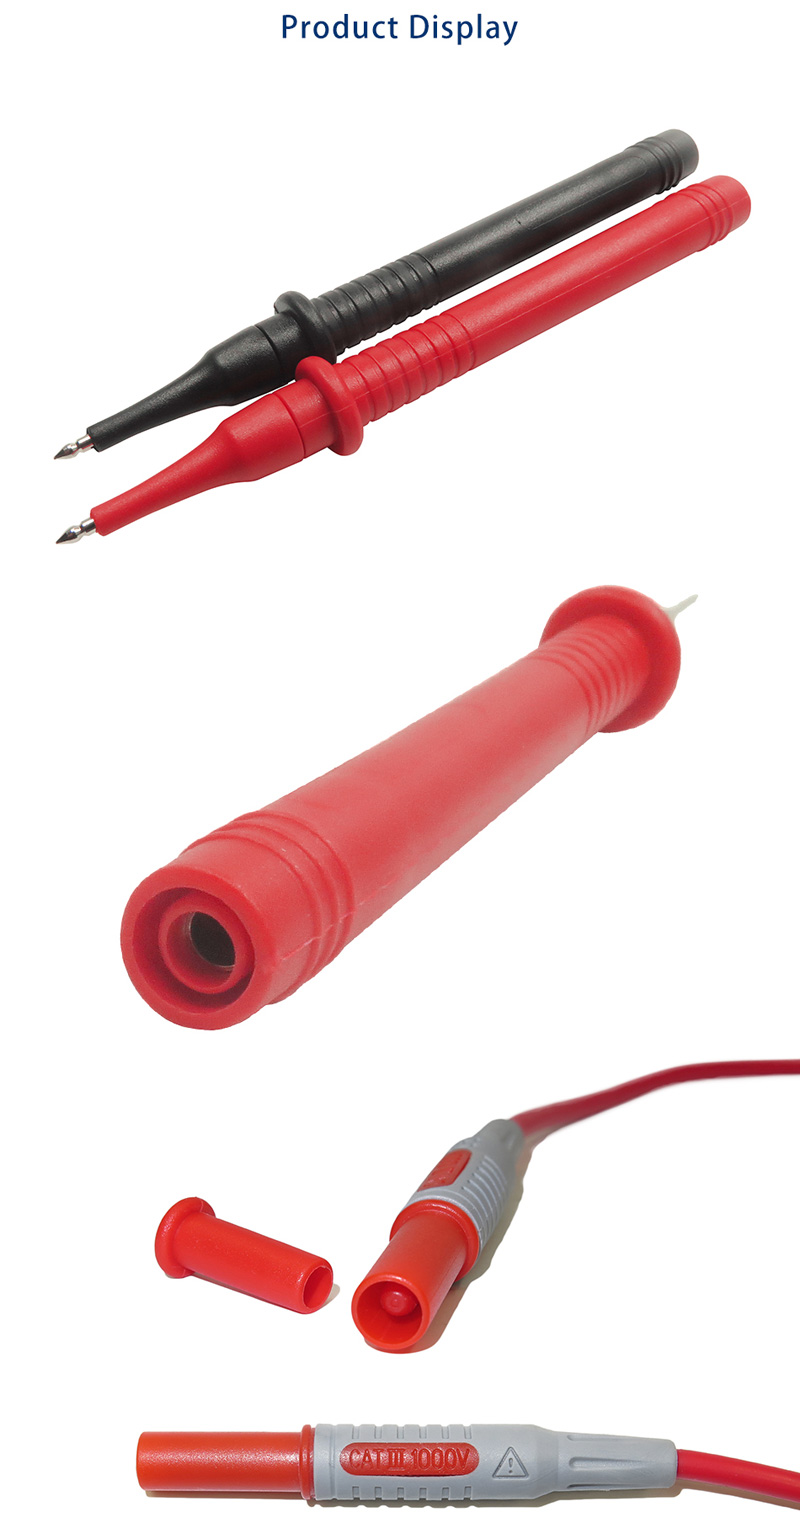 P1300A-10-in-1-Super-Multimeter-Probe-Replaceable-Probe-Clamp-Multi-Meter-Test-Lead-kits-4mm-Banana--1136463-2